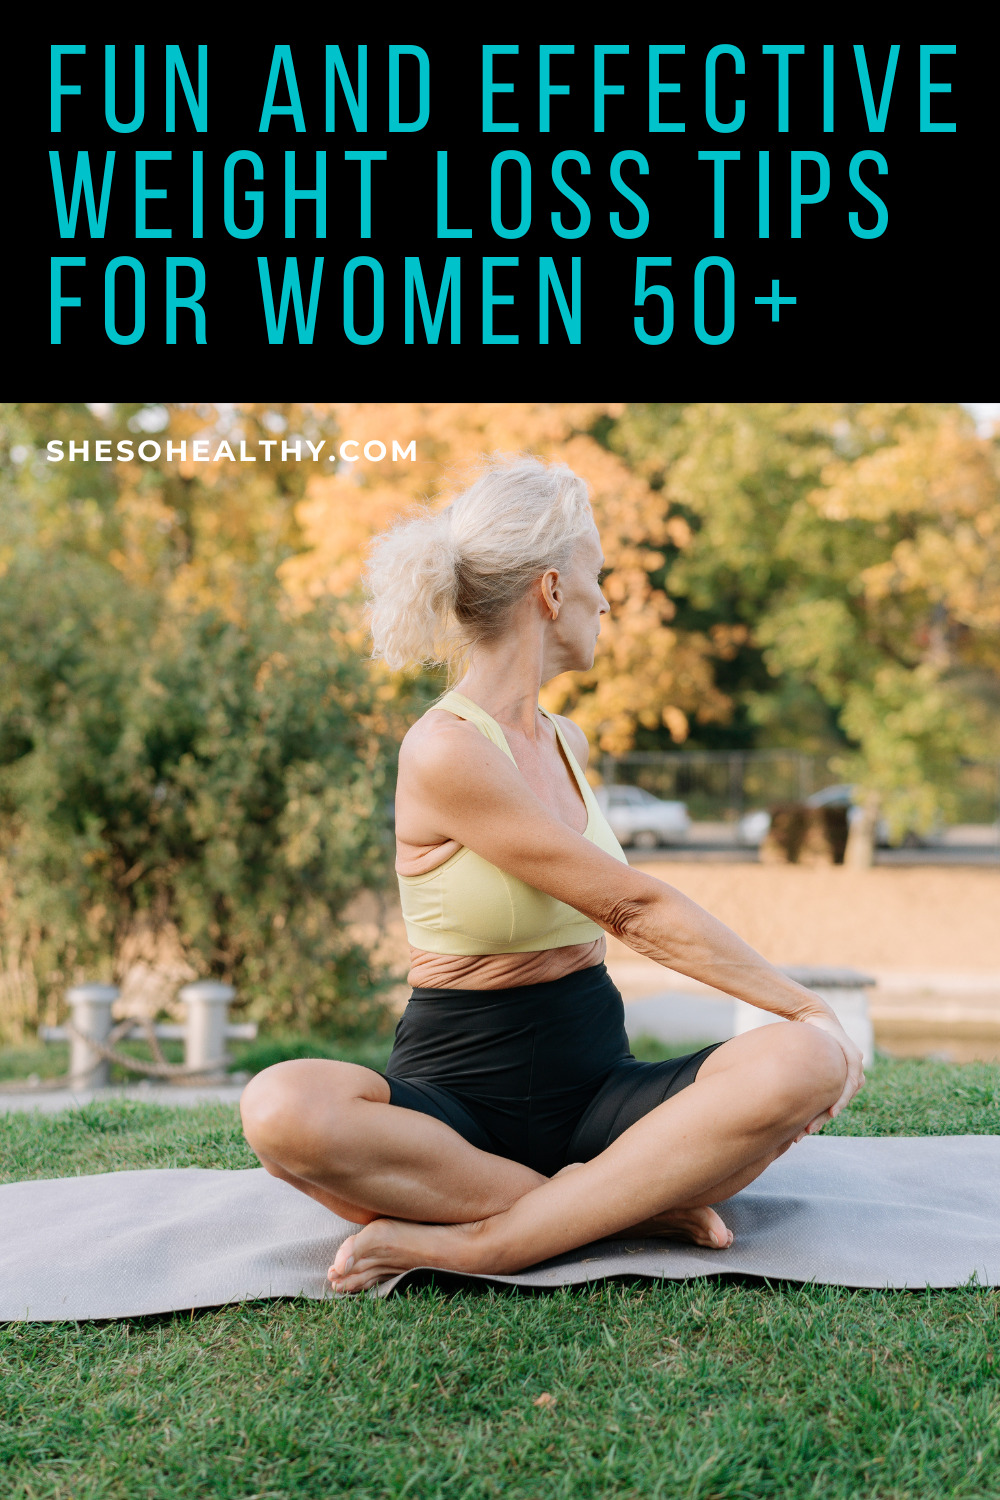 10 Fun And Effective Weight Loss Tips For Women Over 50 She So Healthy